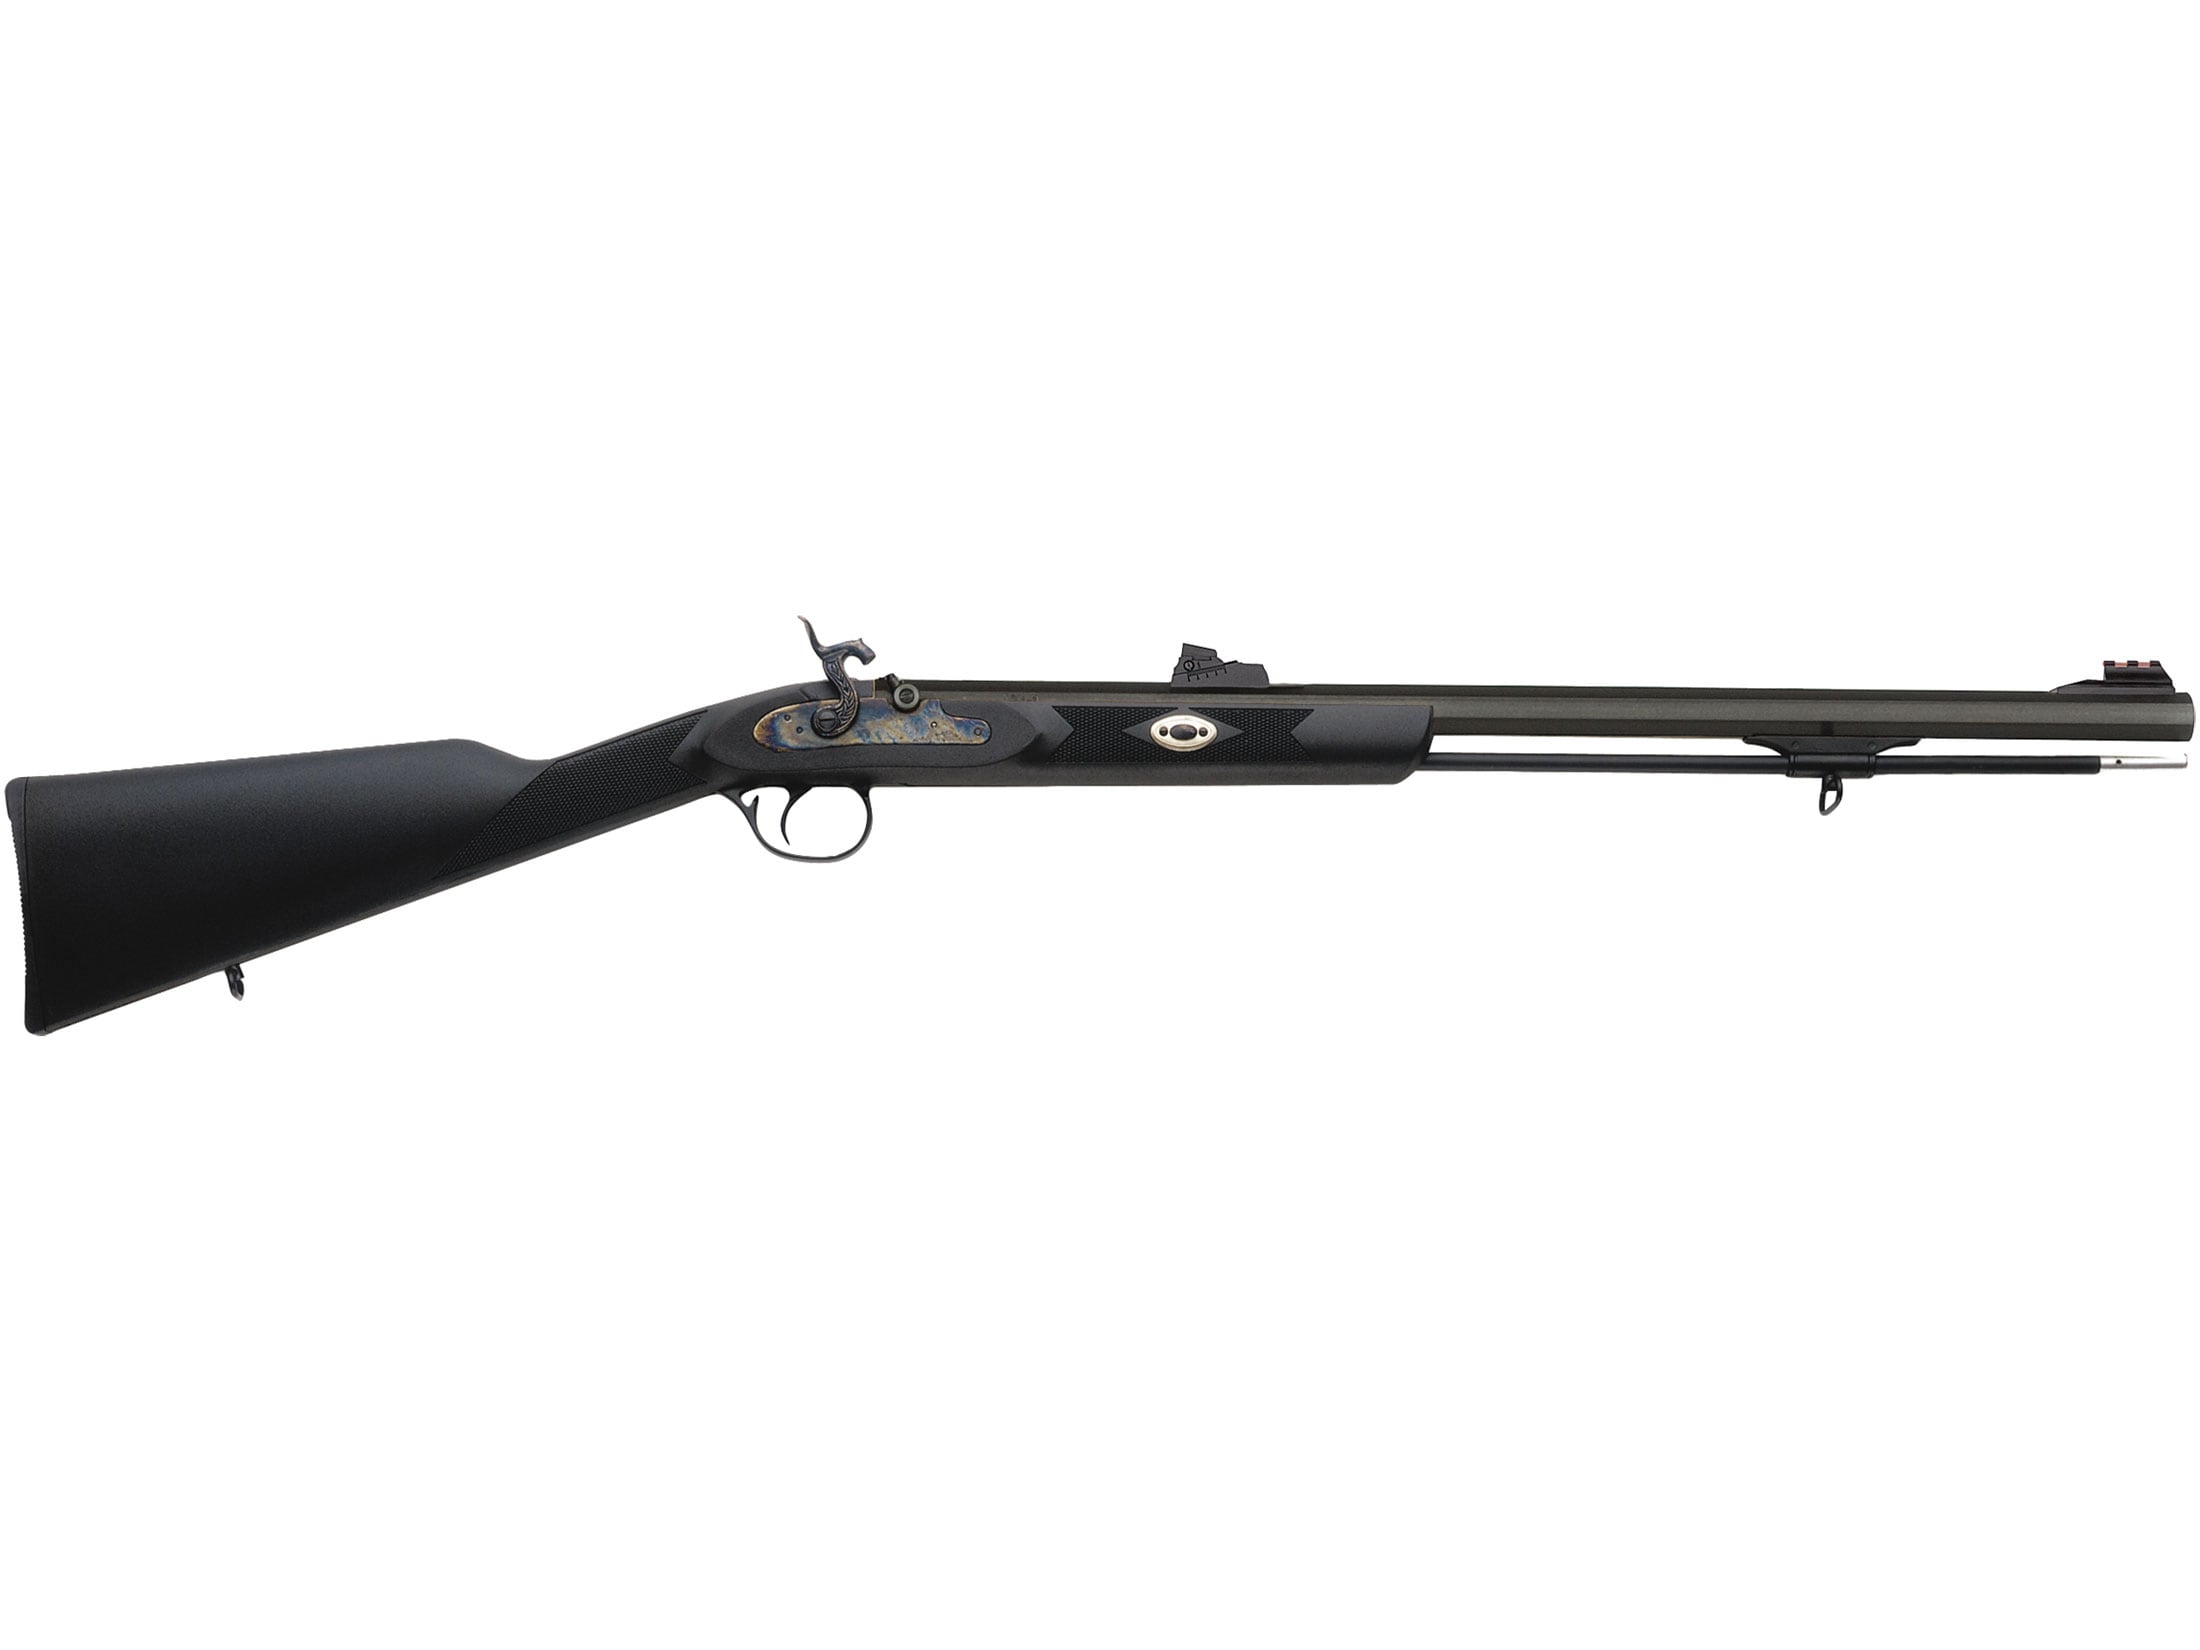 Image of Traditions Deerhunter Muzzleloading Rifle 50 Caliber Percussion 24" Blued Barrel Synthetic Stock Black